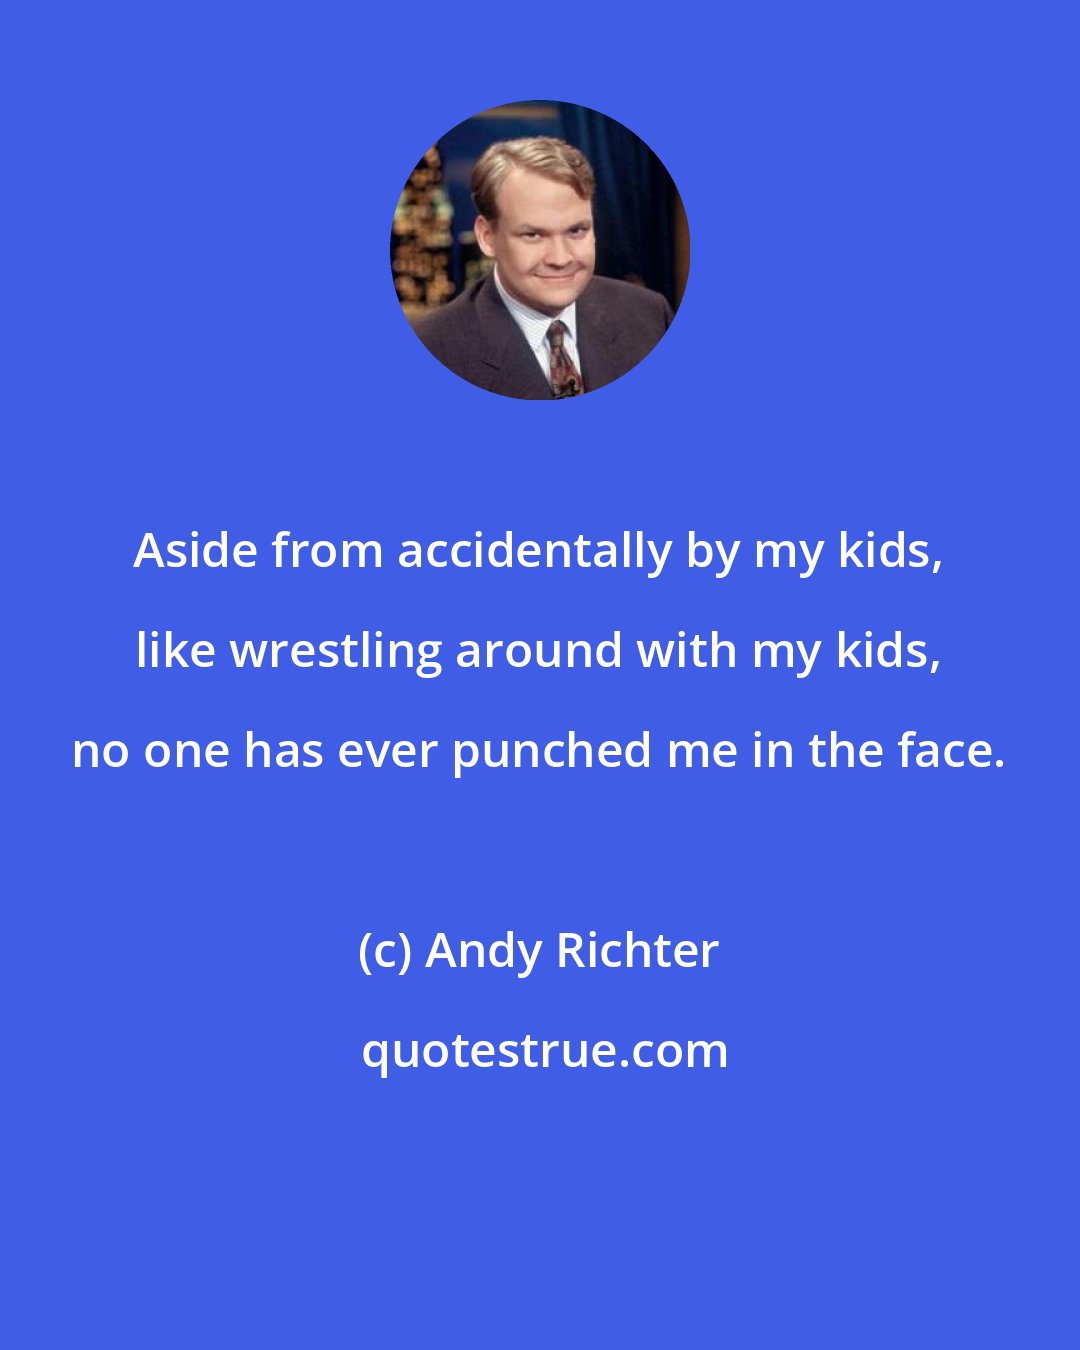 Andy Richter: Aside from accidentally by my kids, like wrestling around with my kids, no one has ever punched me in the face.